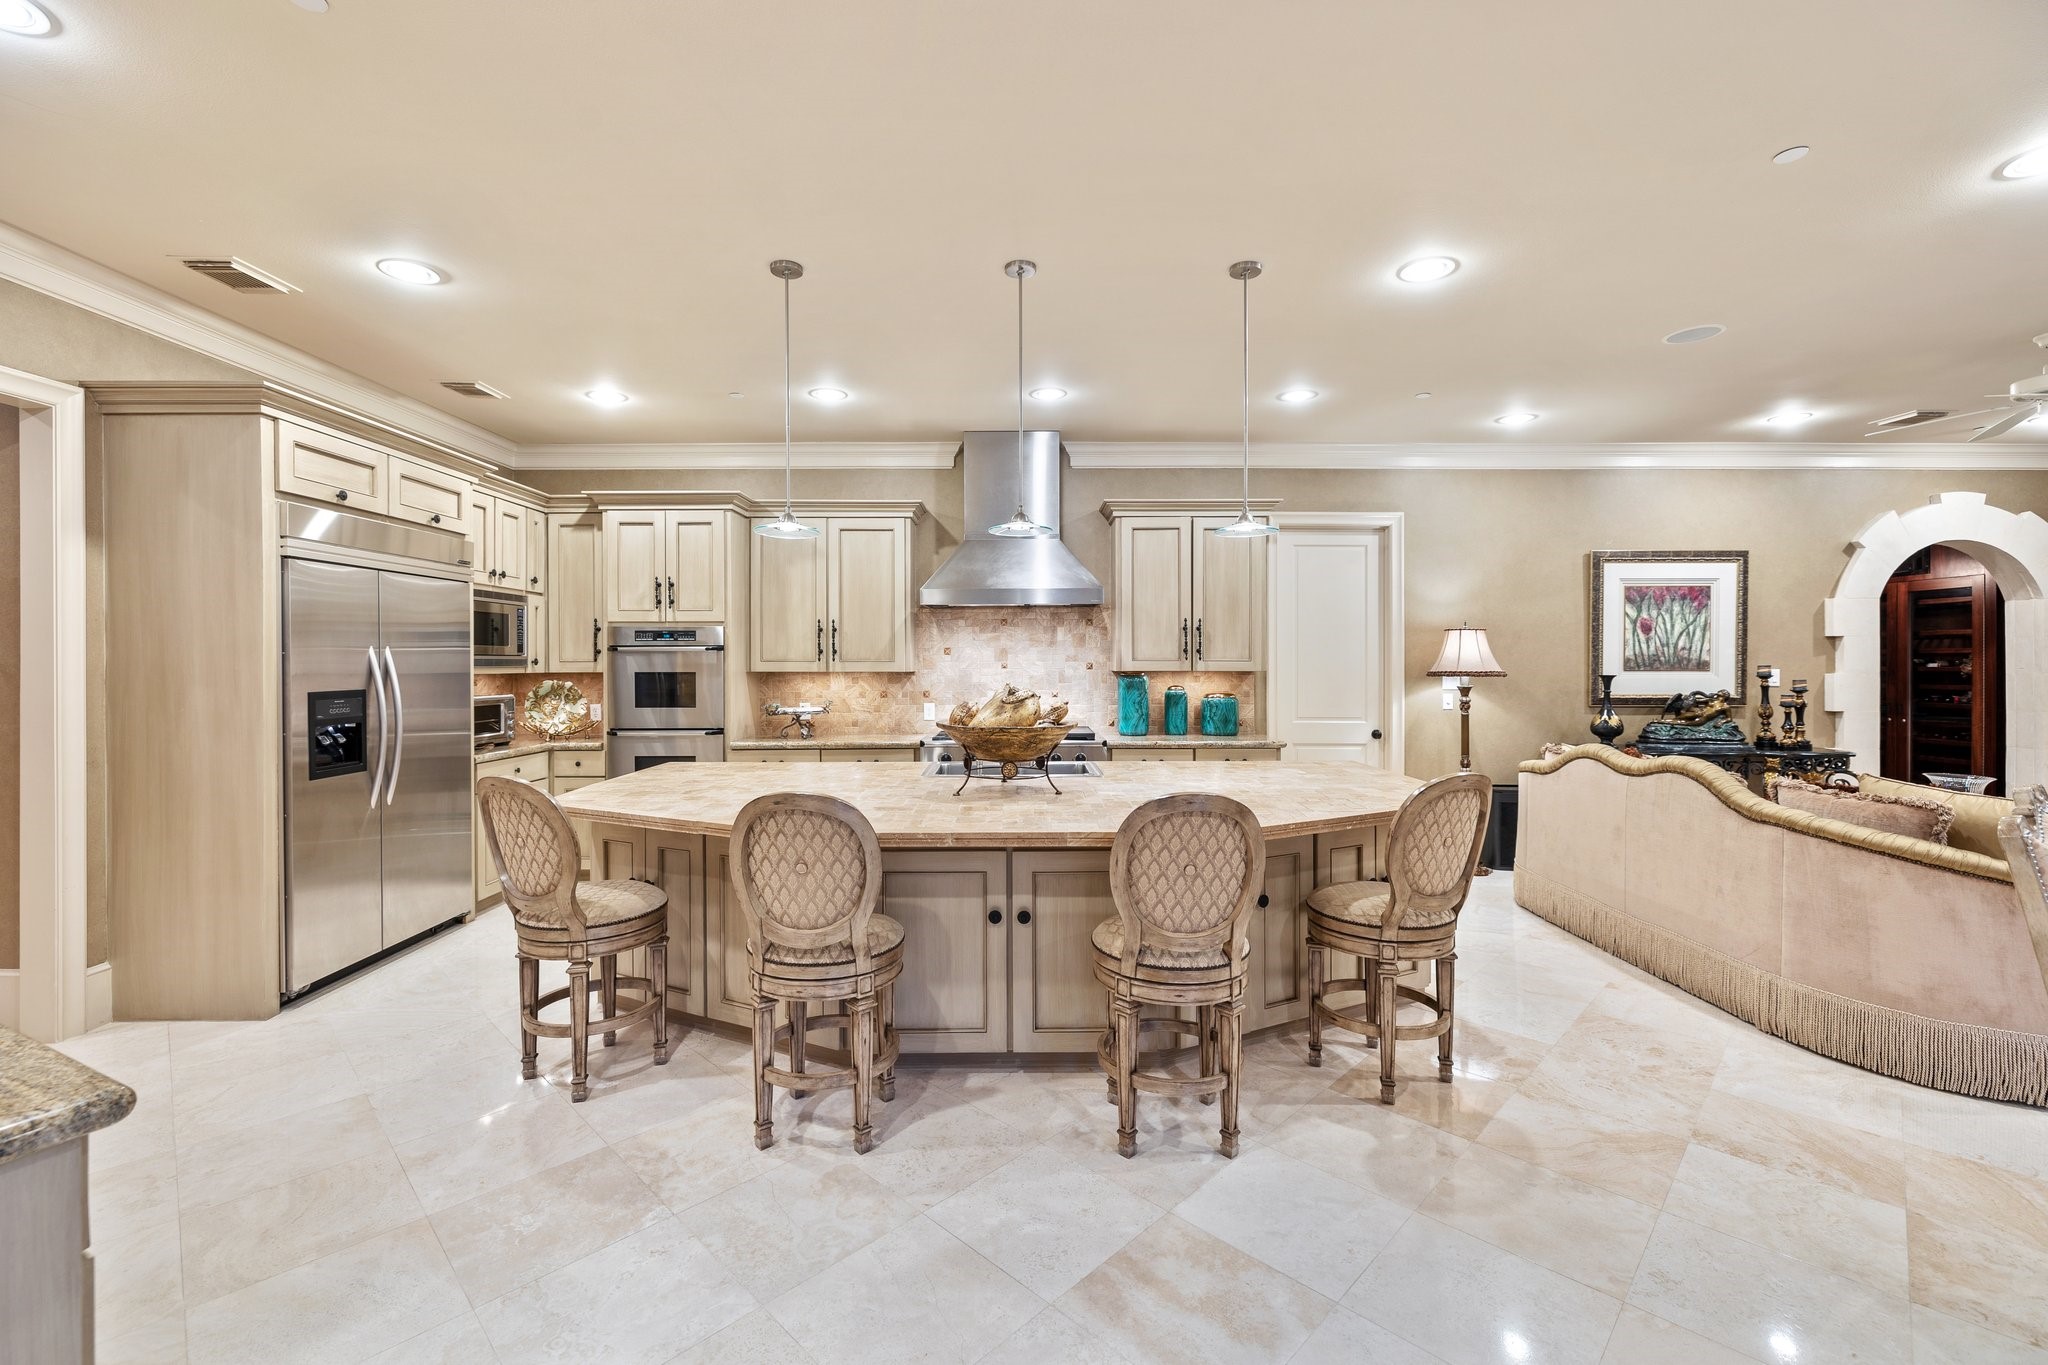 The grand kitchen with full bar seating, open floor plan, stainless steel appliances and granite countertops is filled with oversized windows that bathe the space in natural light.